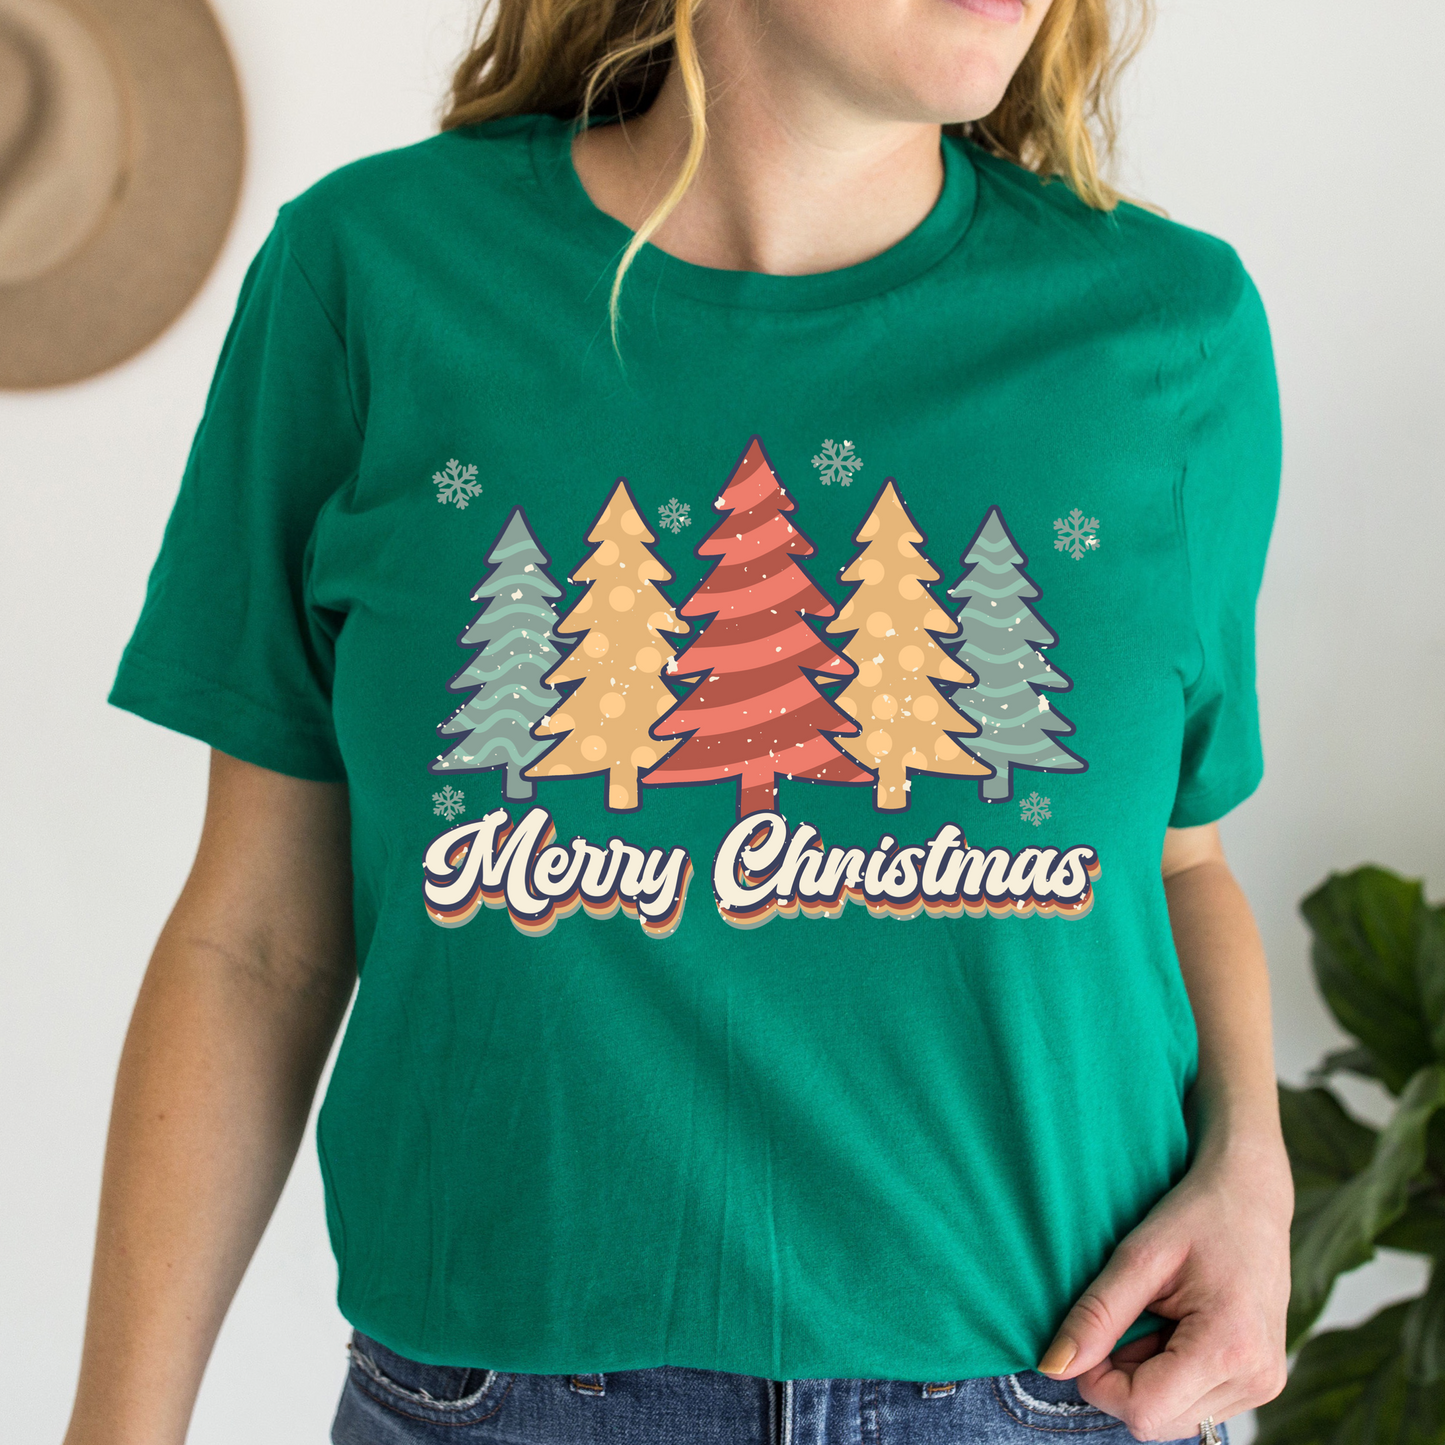 Vintage Merry Christmas t shirt in Green